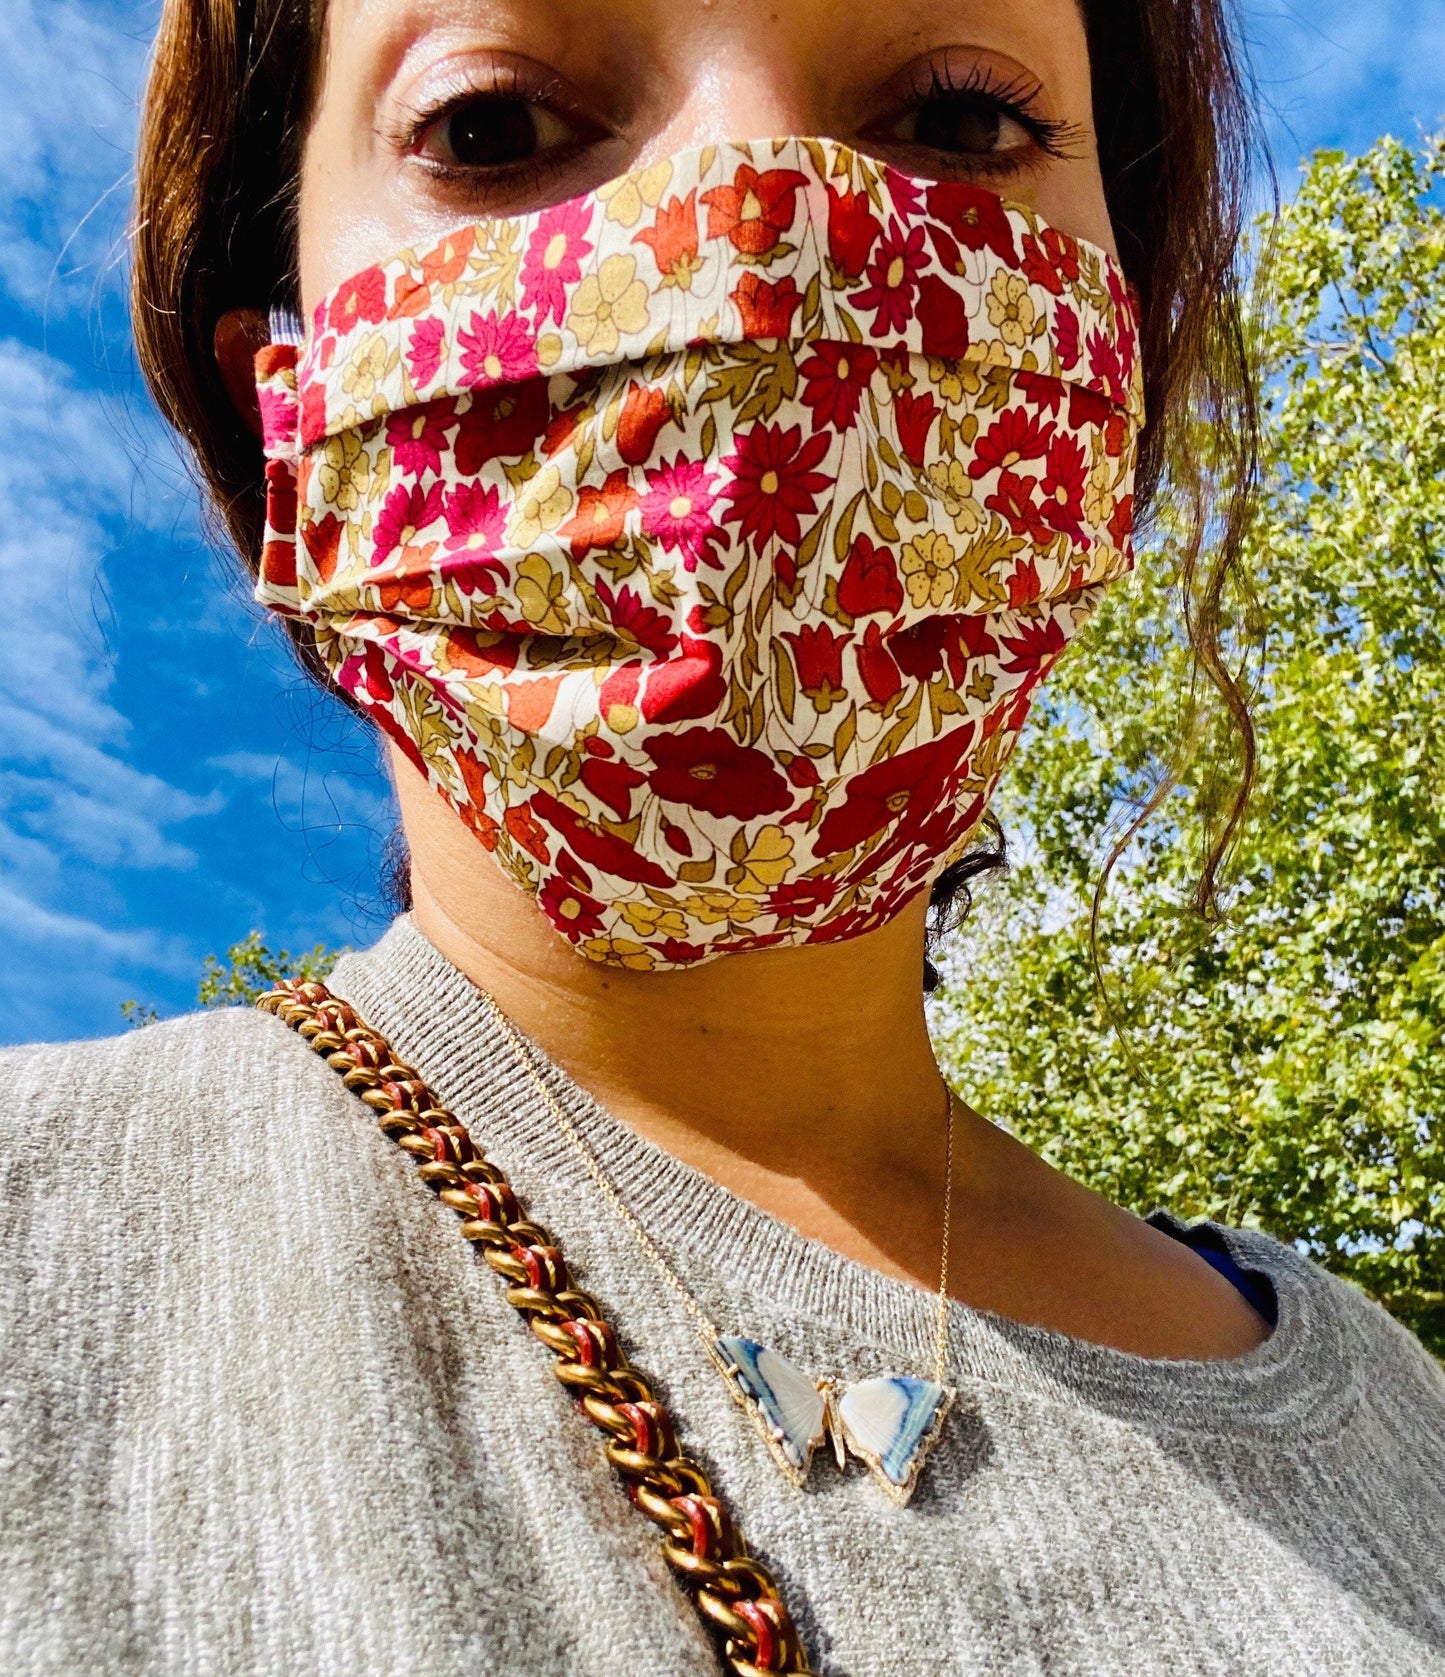 Liberty of London Cotton Face Mask Karin's Garden Floral Print, so soft, so comfortable.  Hand sewn in WA state.